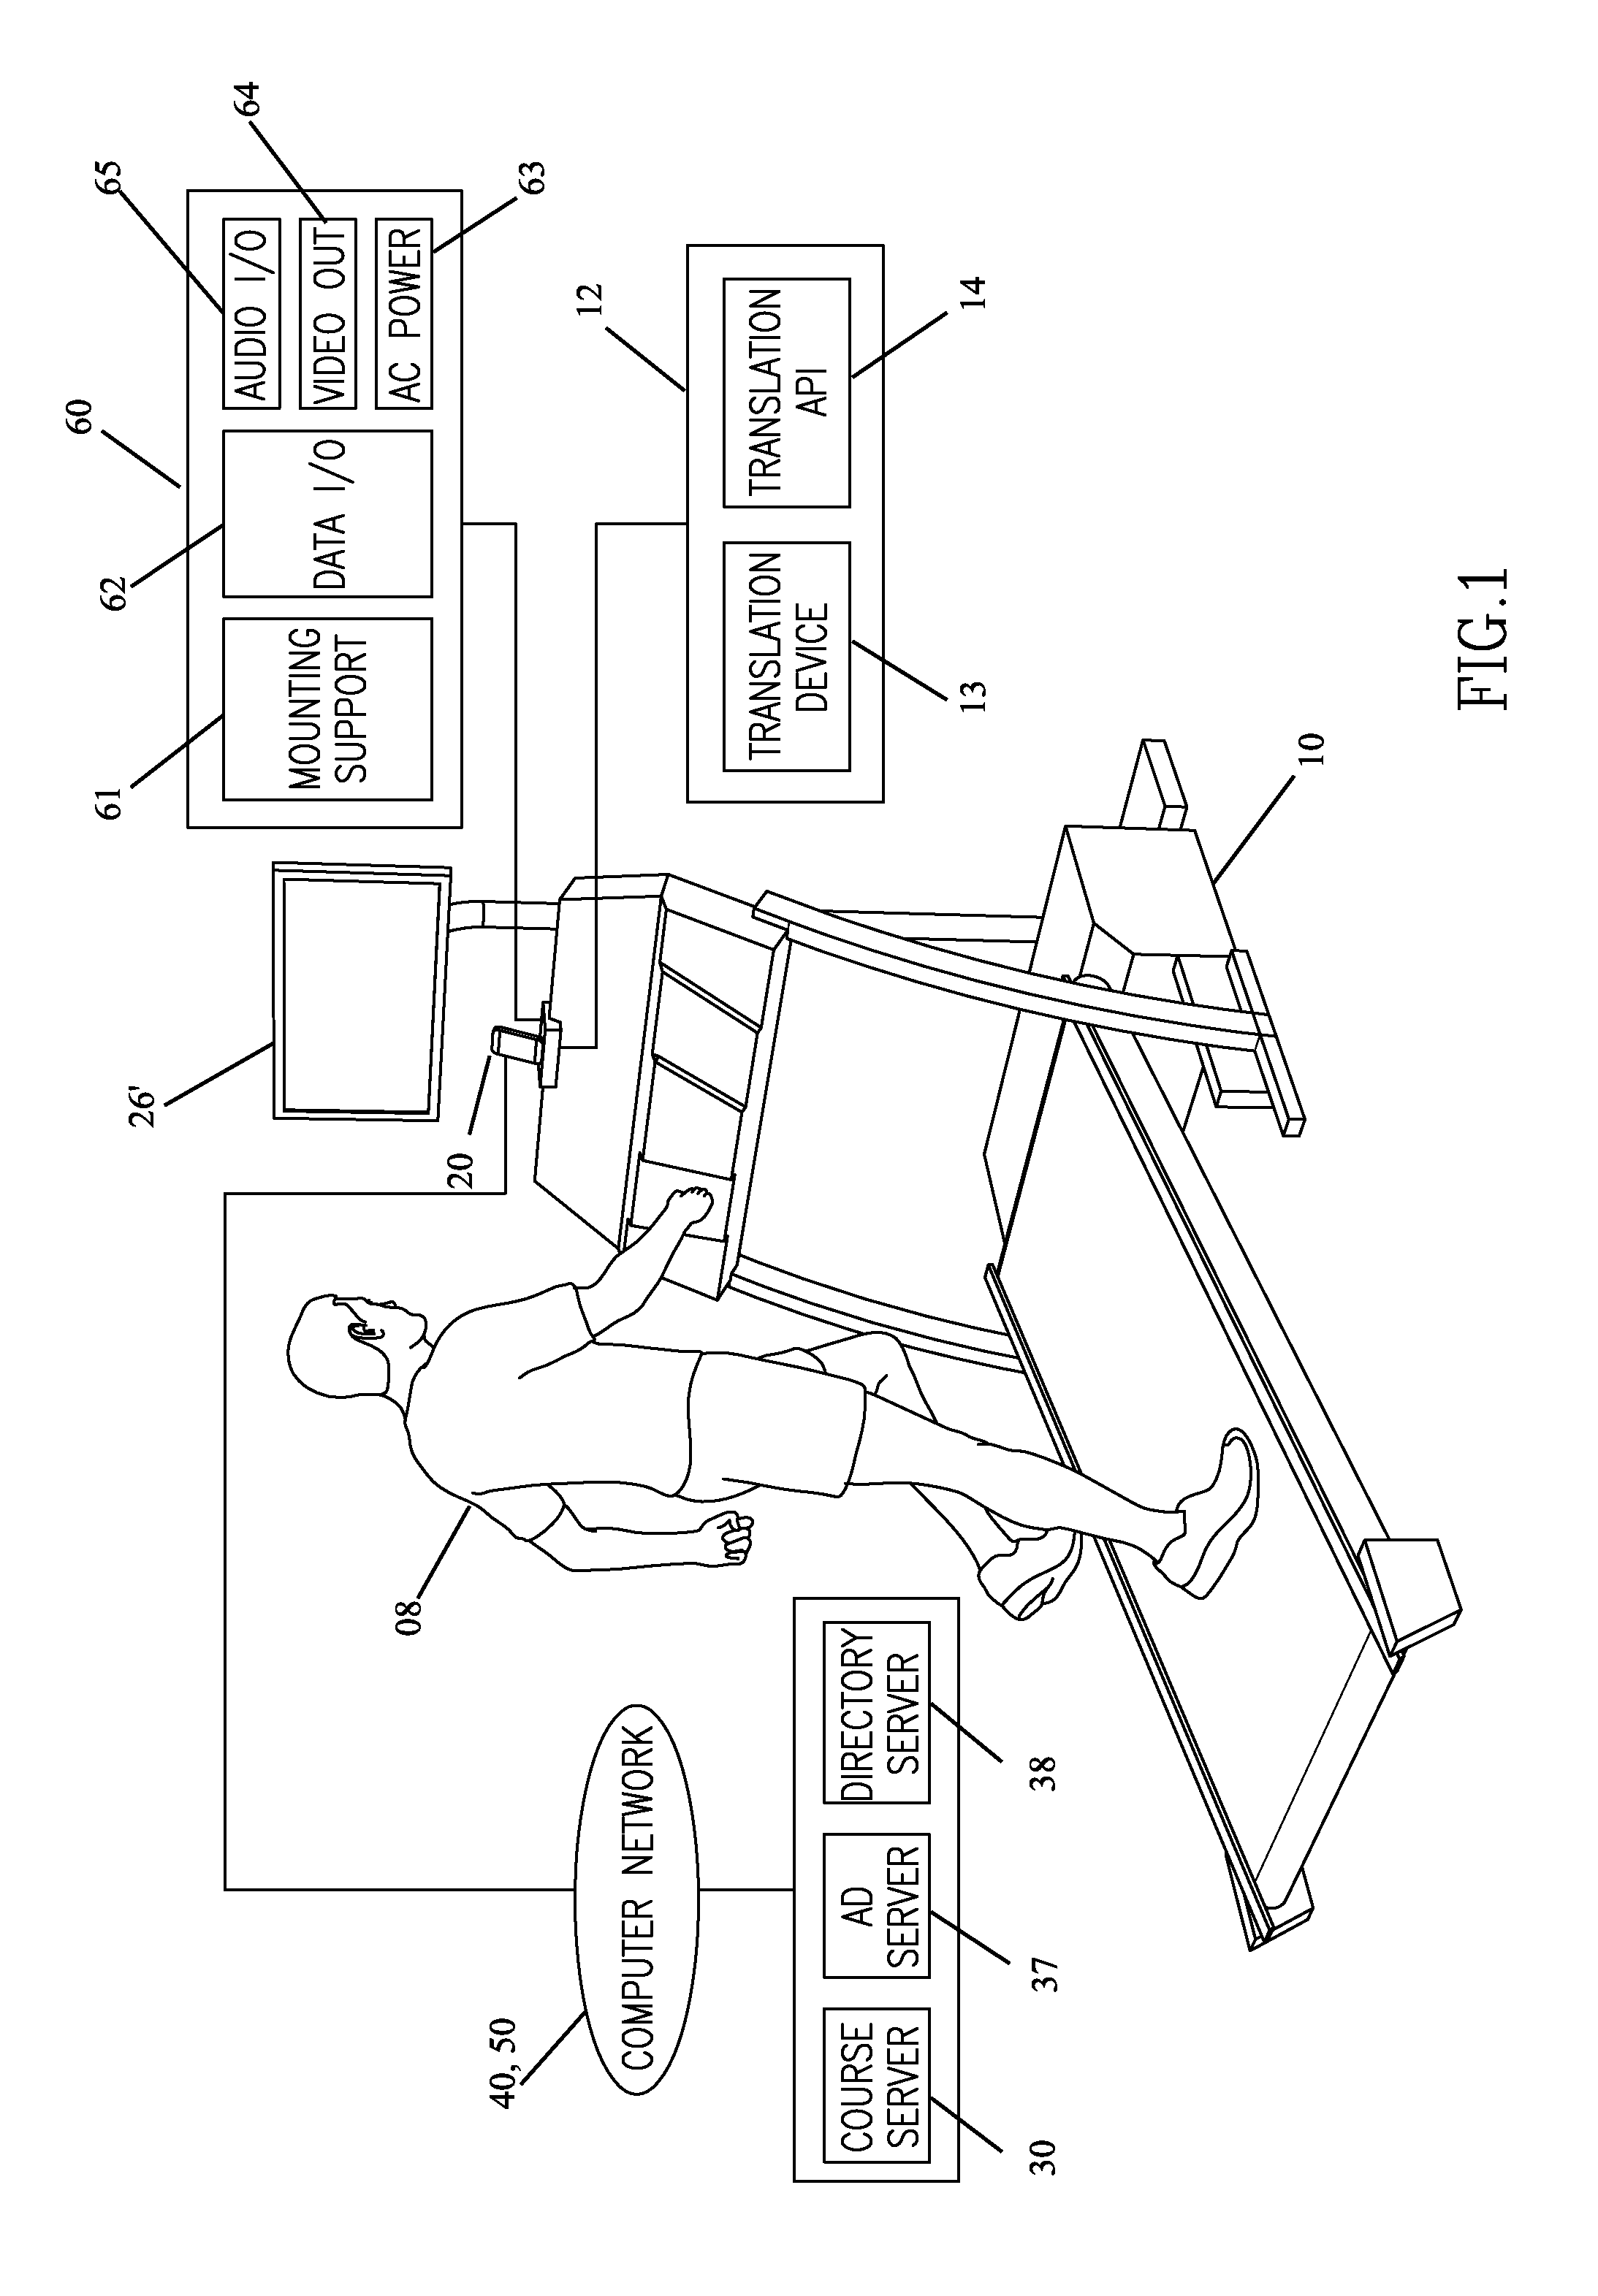 Systems and methods for exercise in an interactive virtual environment